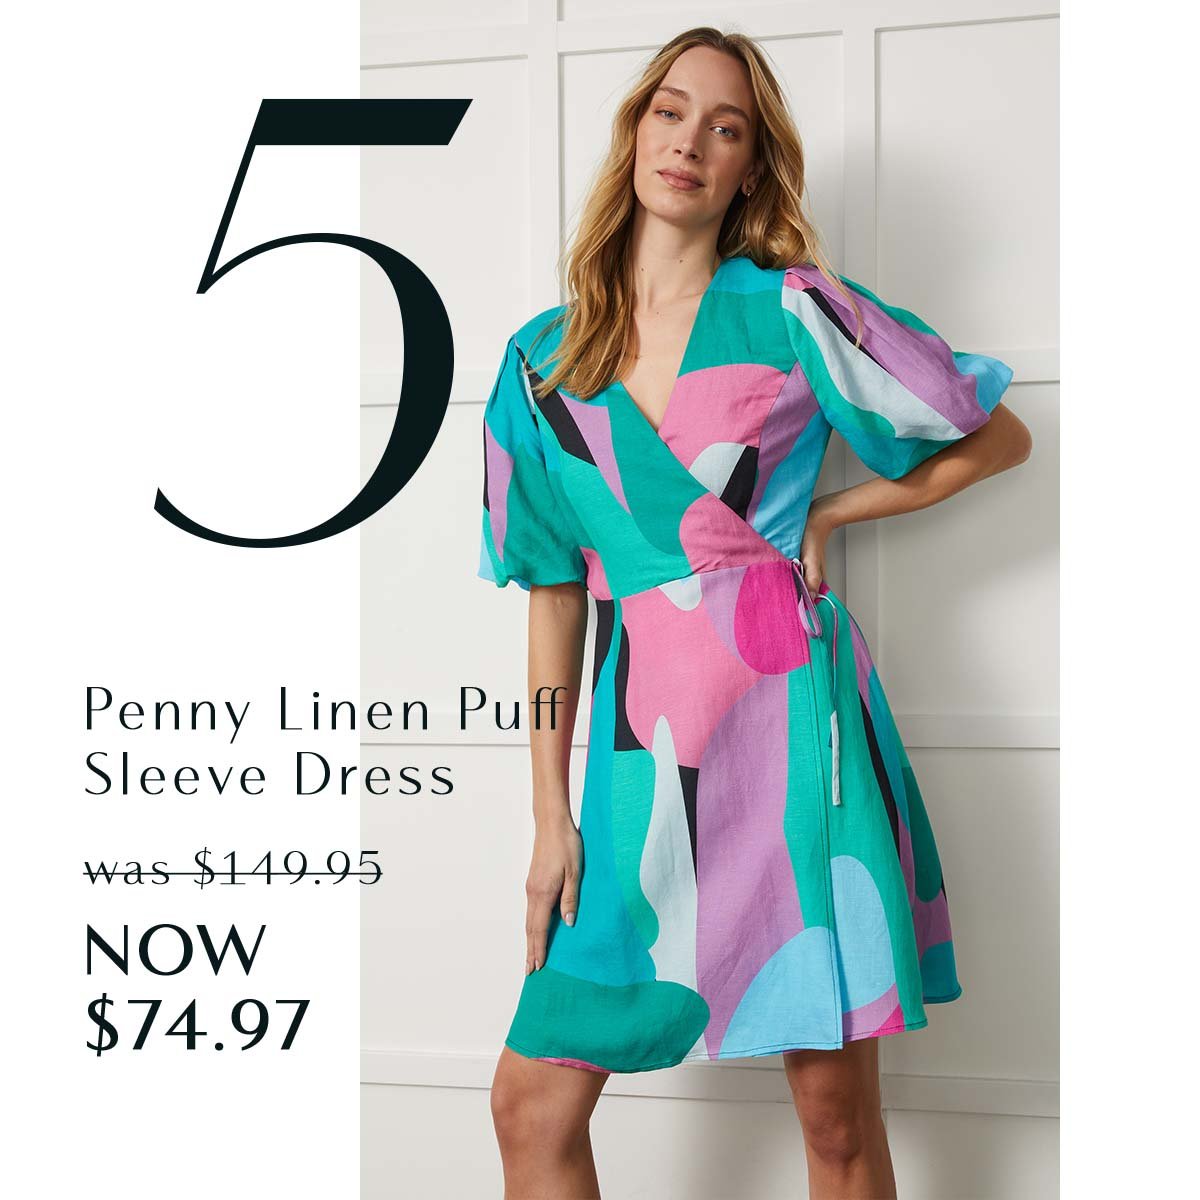 5. Penny Linen Puff Sleeve Dress was $149.95 NOW $74.97